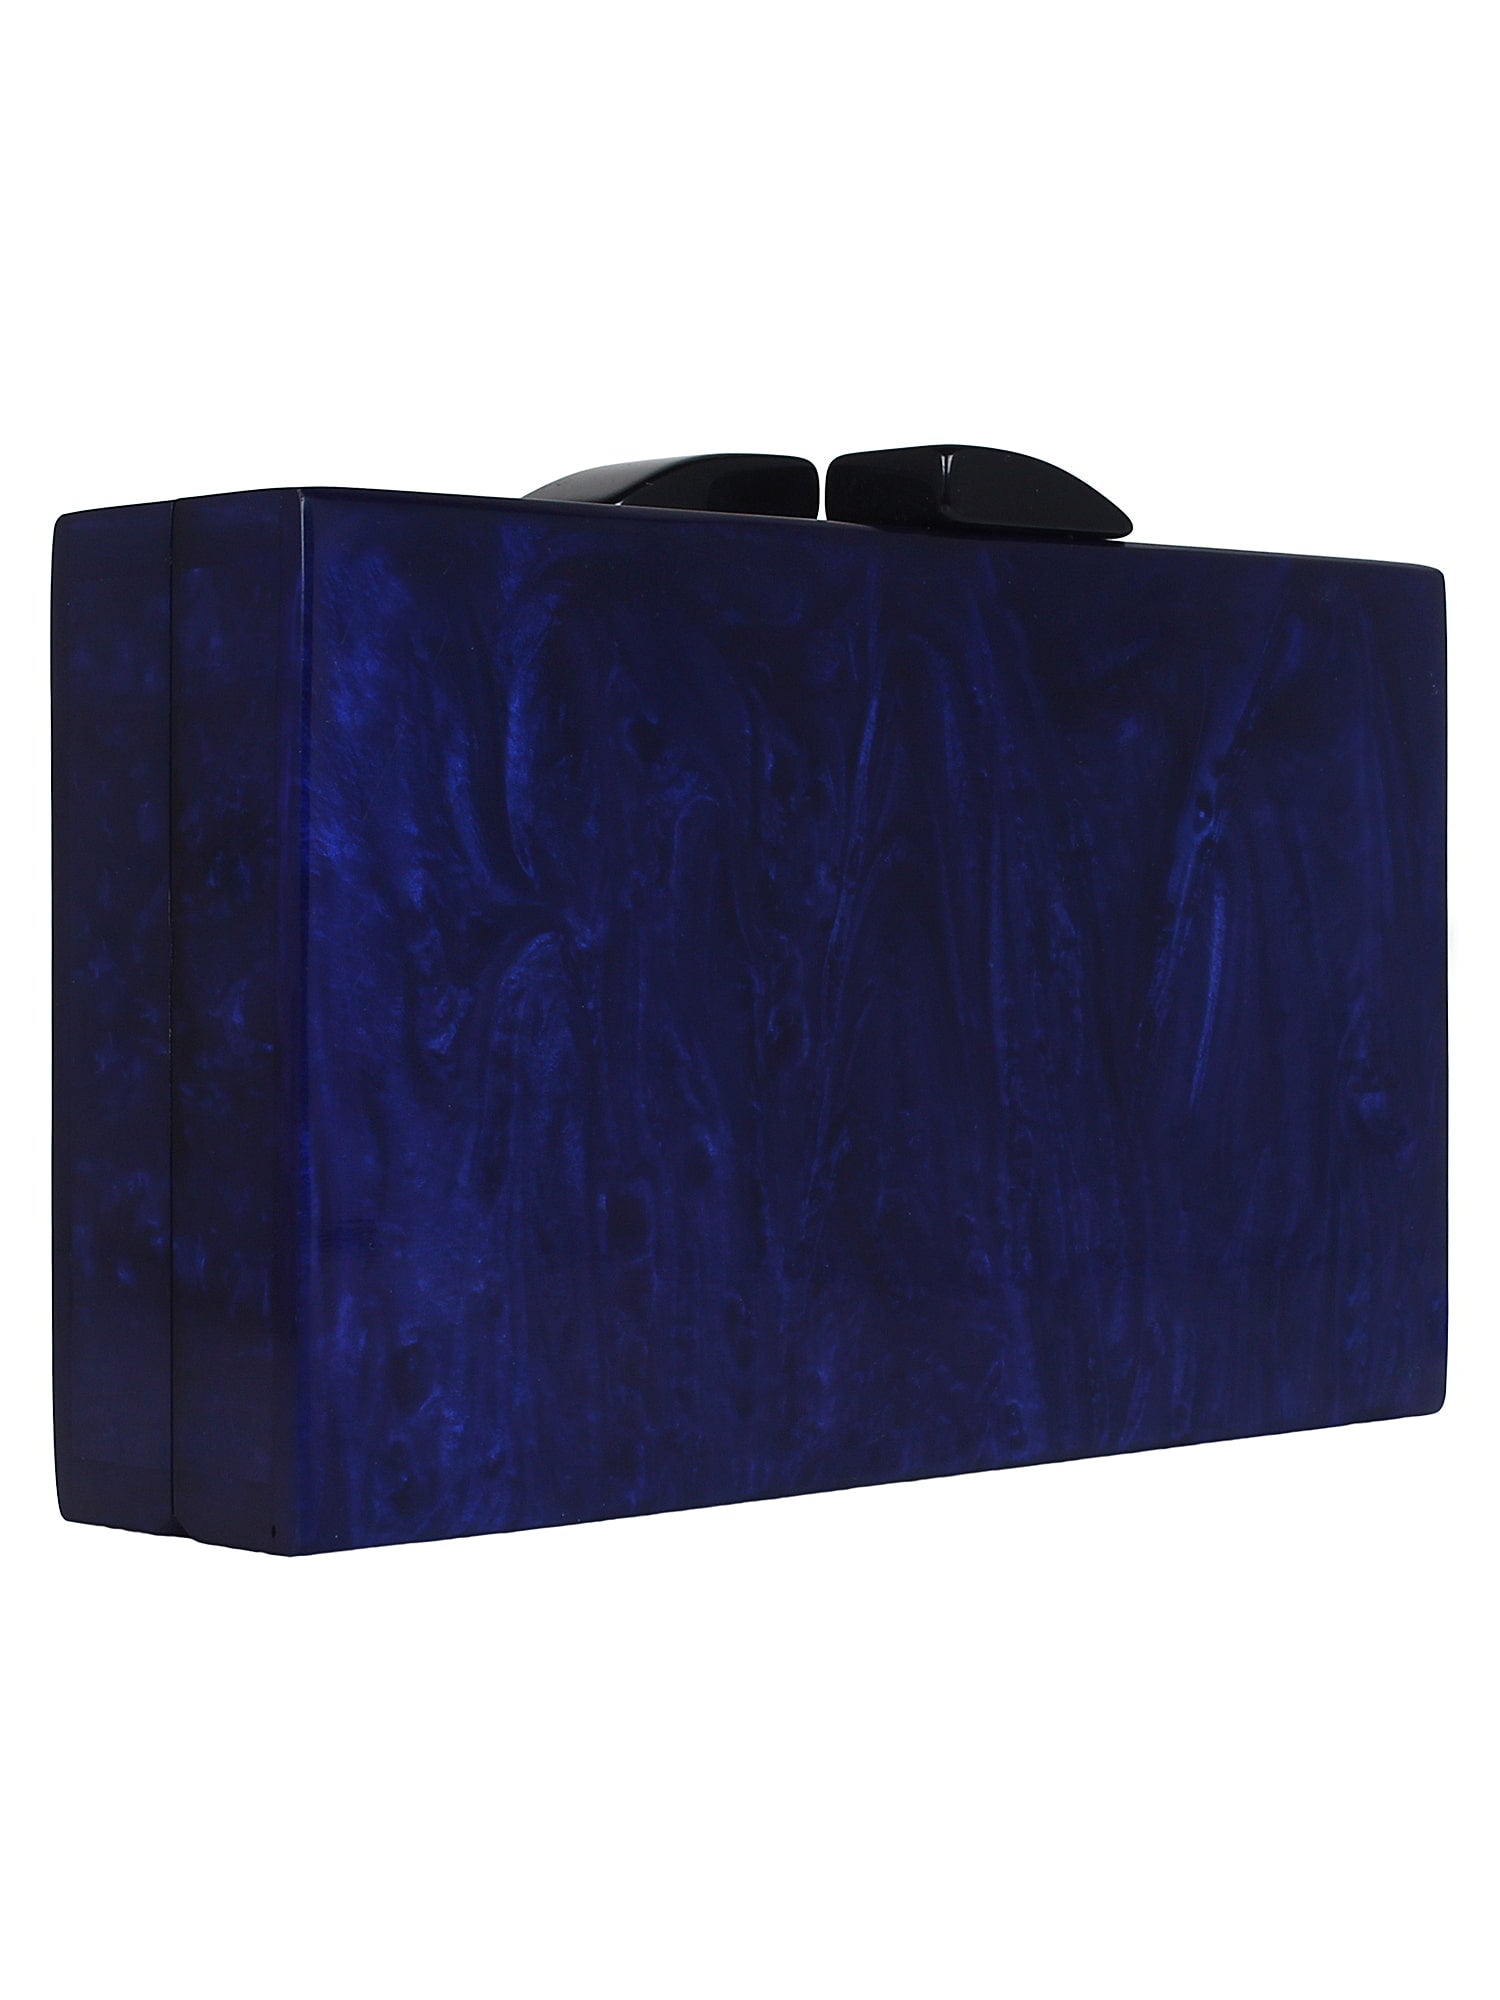 Pitch Textured Resin Clutch